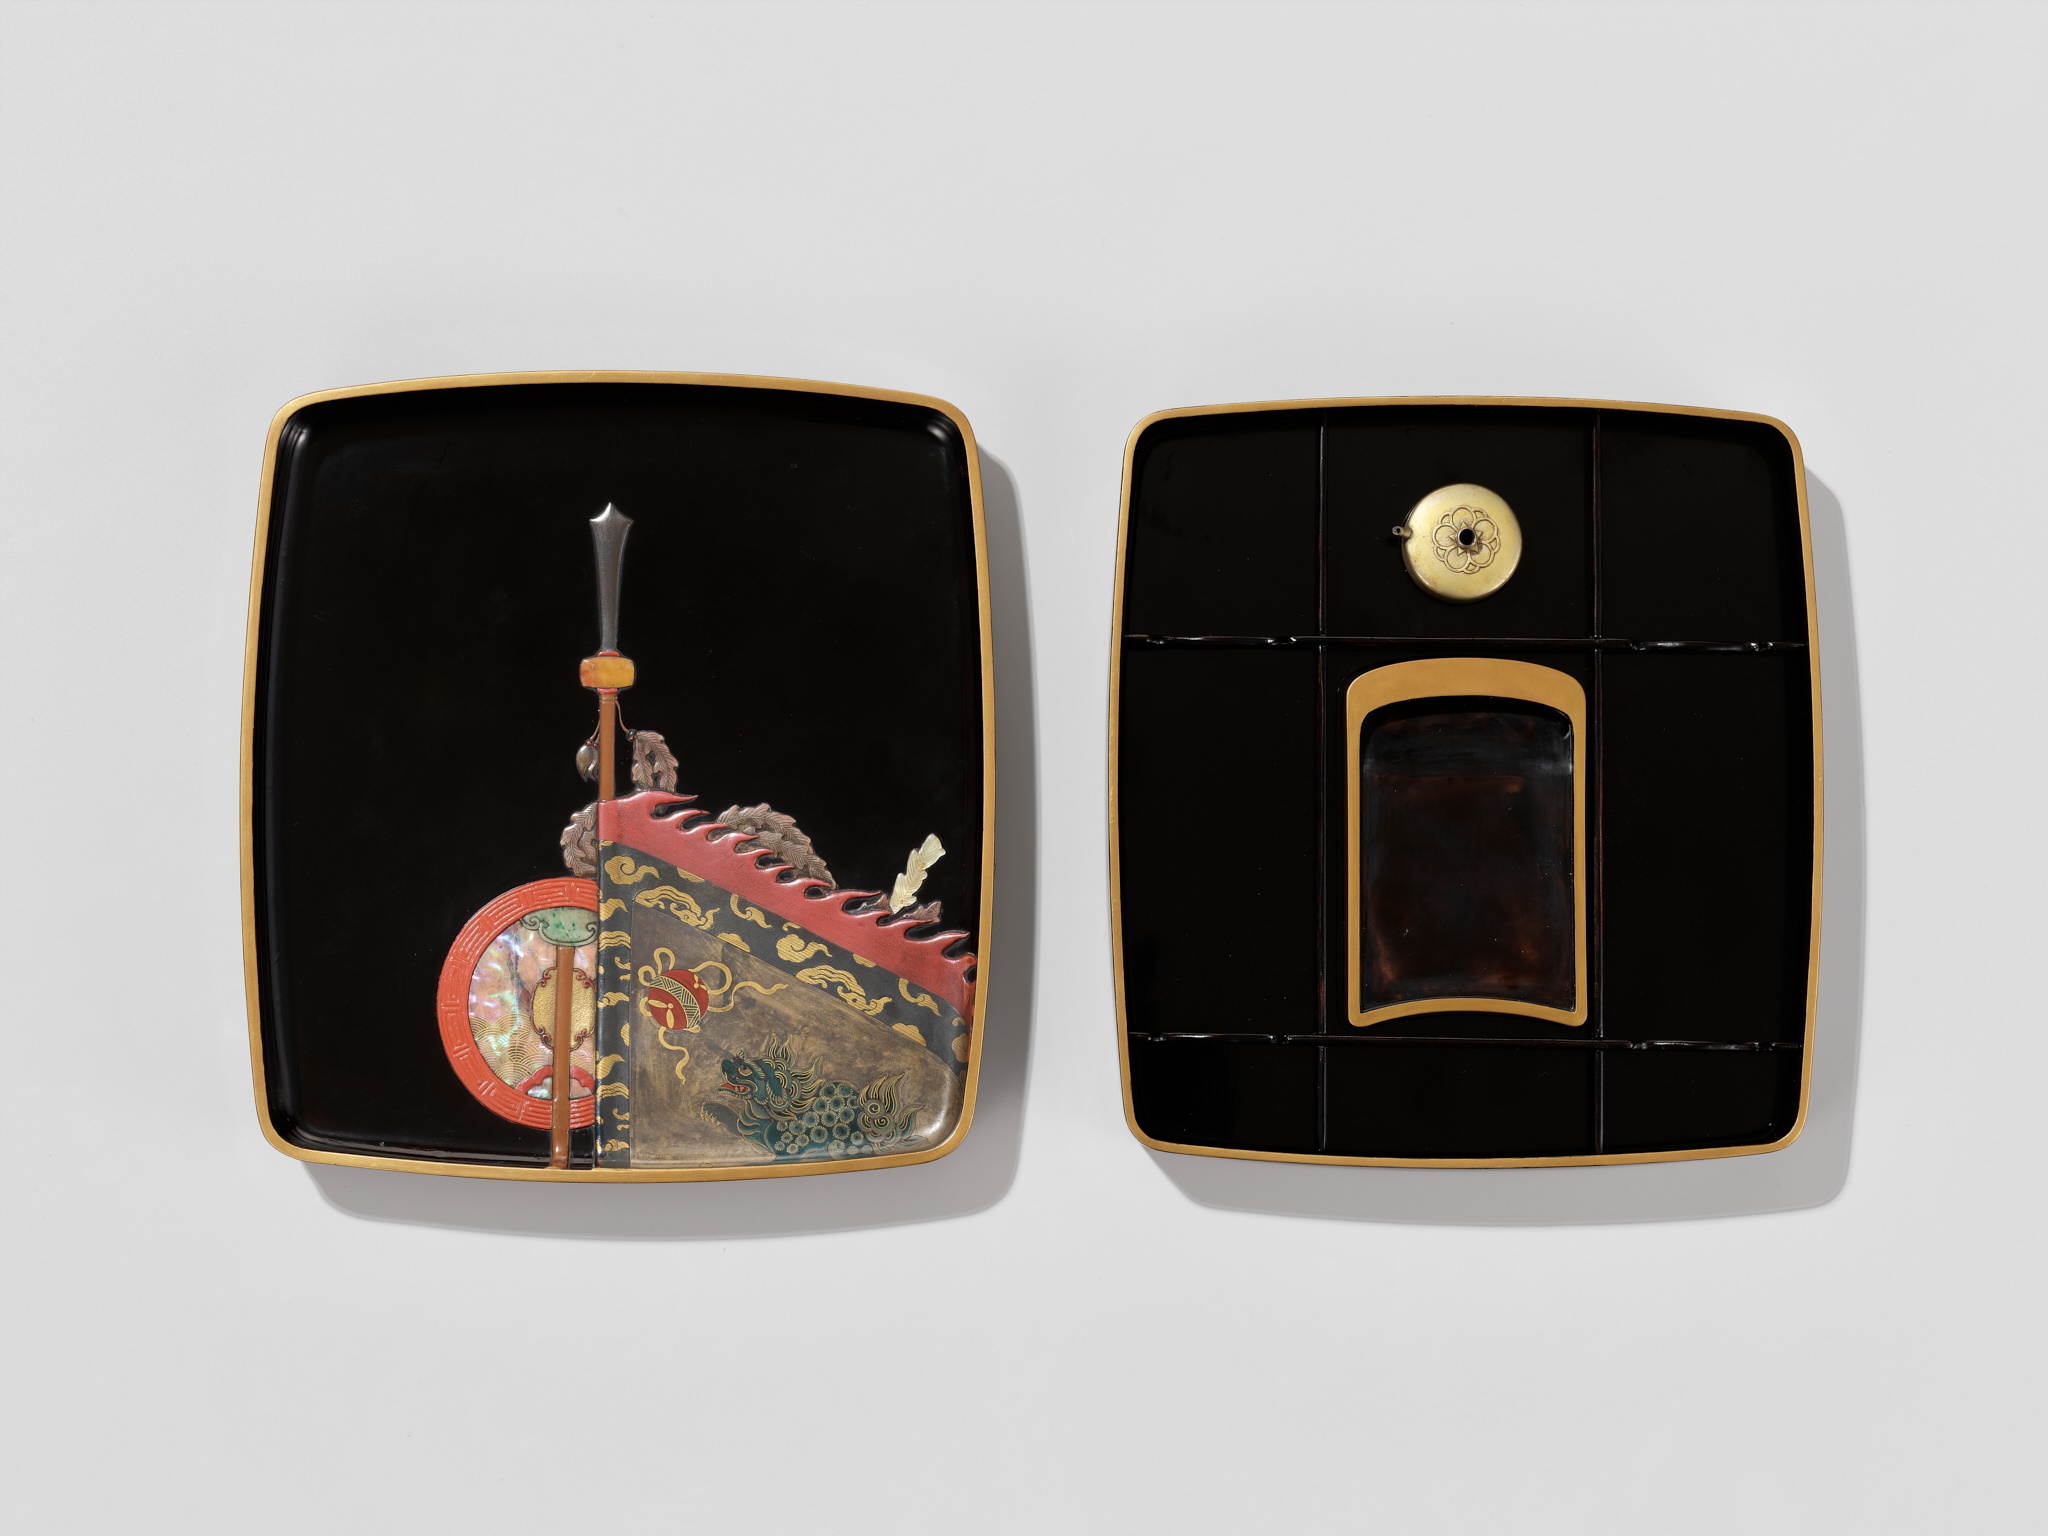 A SUPERB RITSUO-SCHOOL LACQUER AND CERAMIC-INLAID SUZURIBAKO DEPICTING AN ELEPHANT - Image 2 of 9